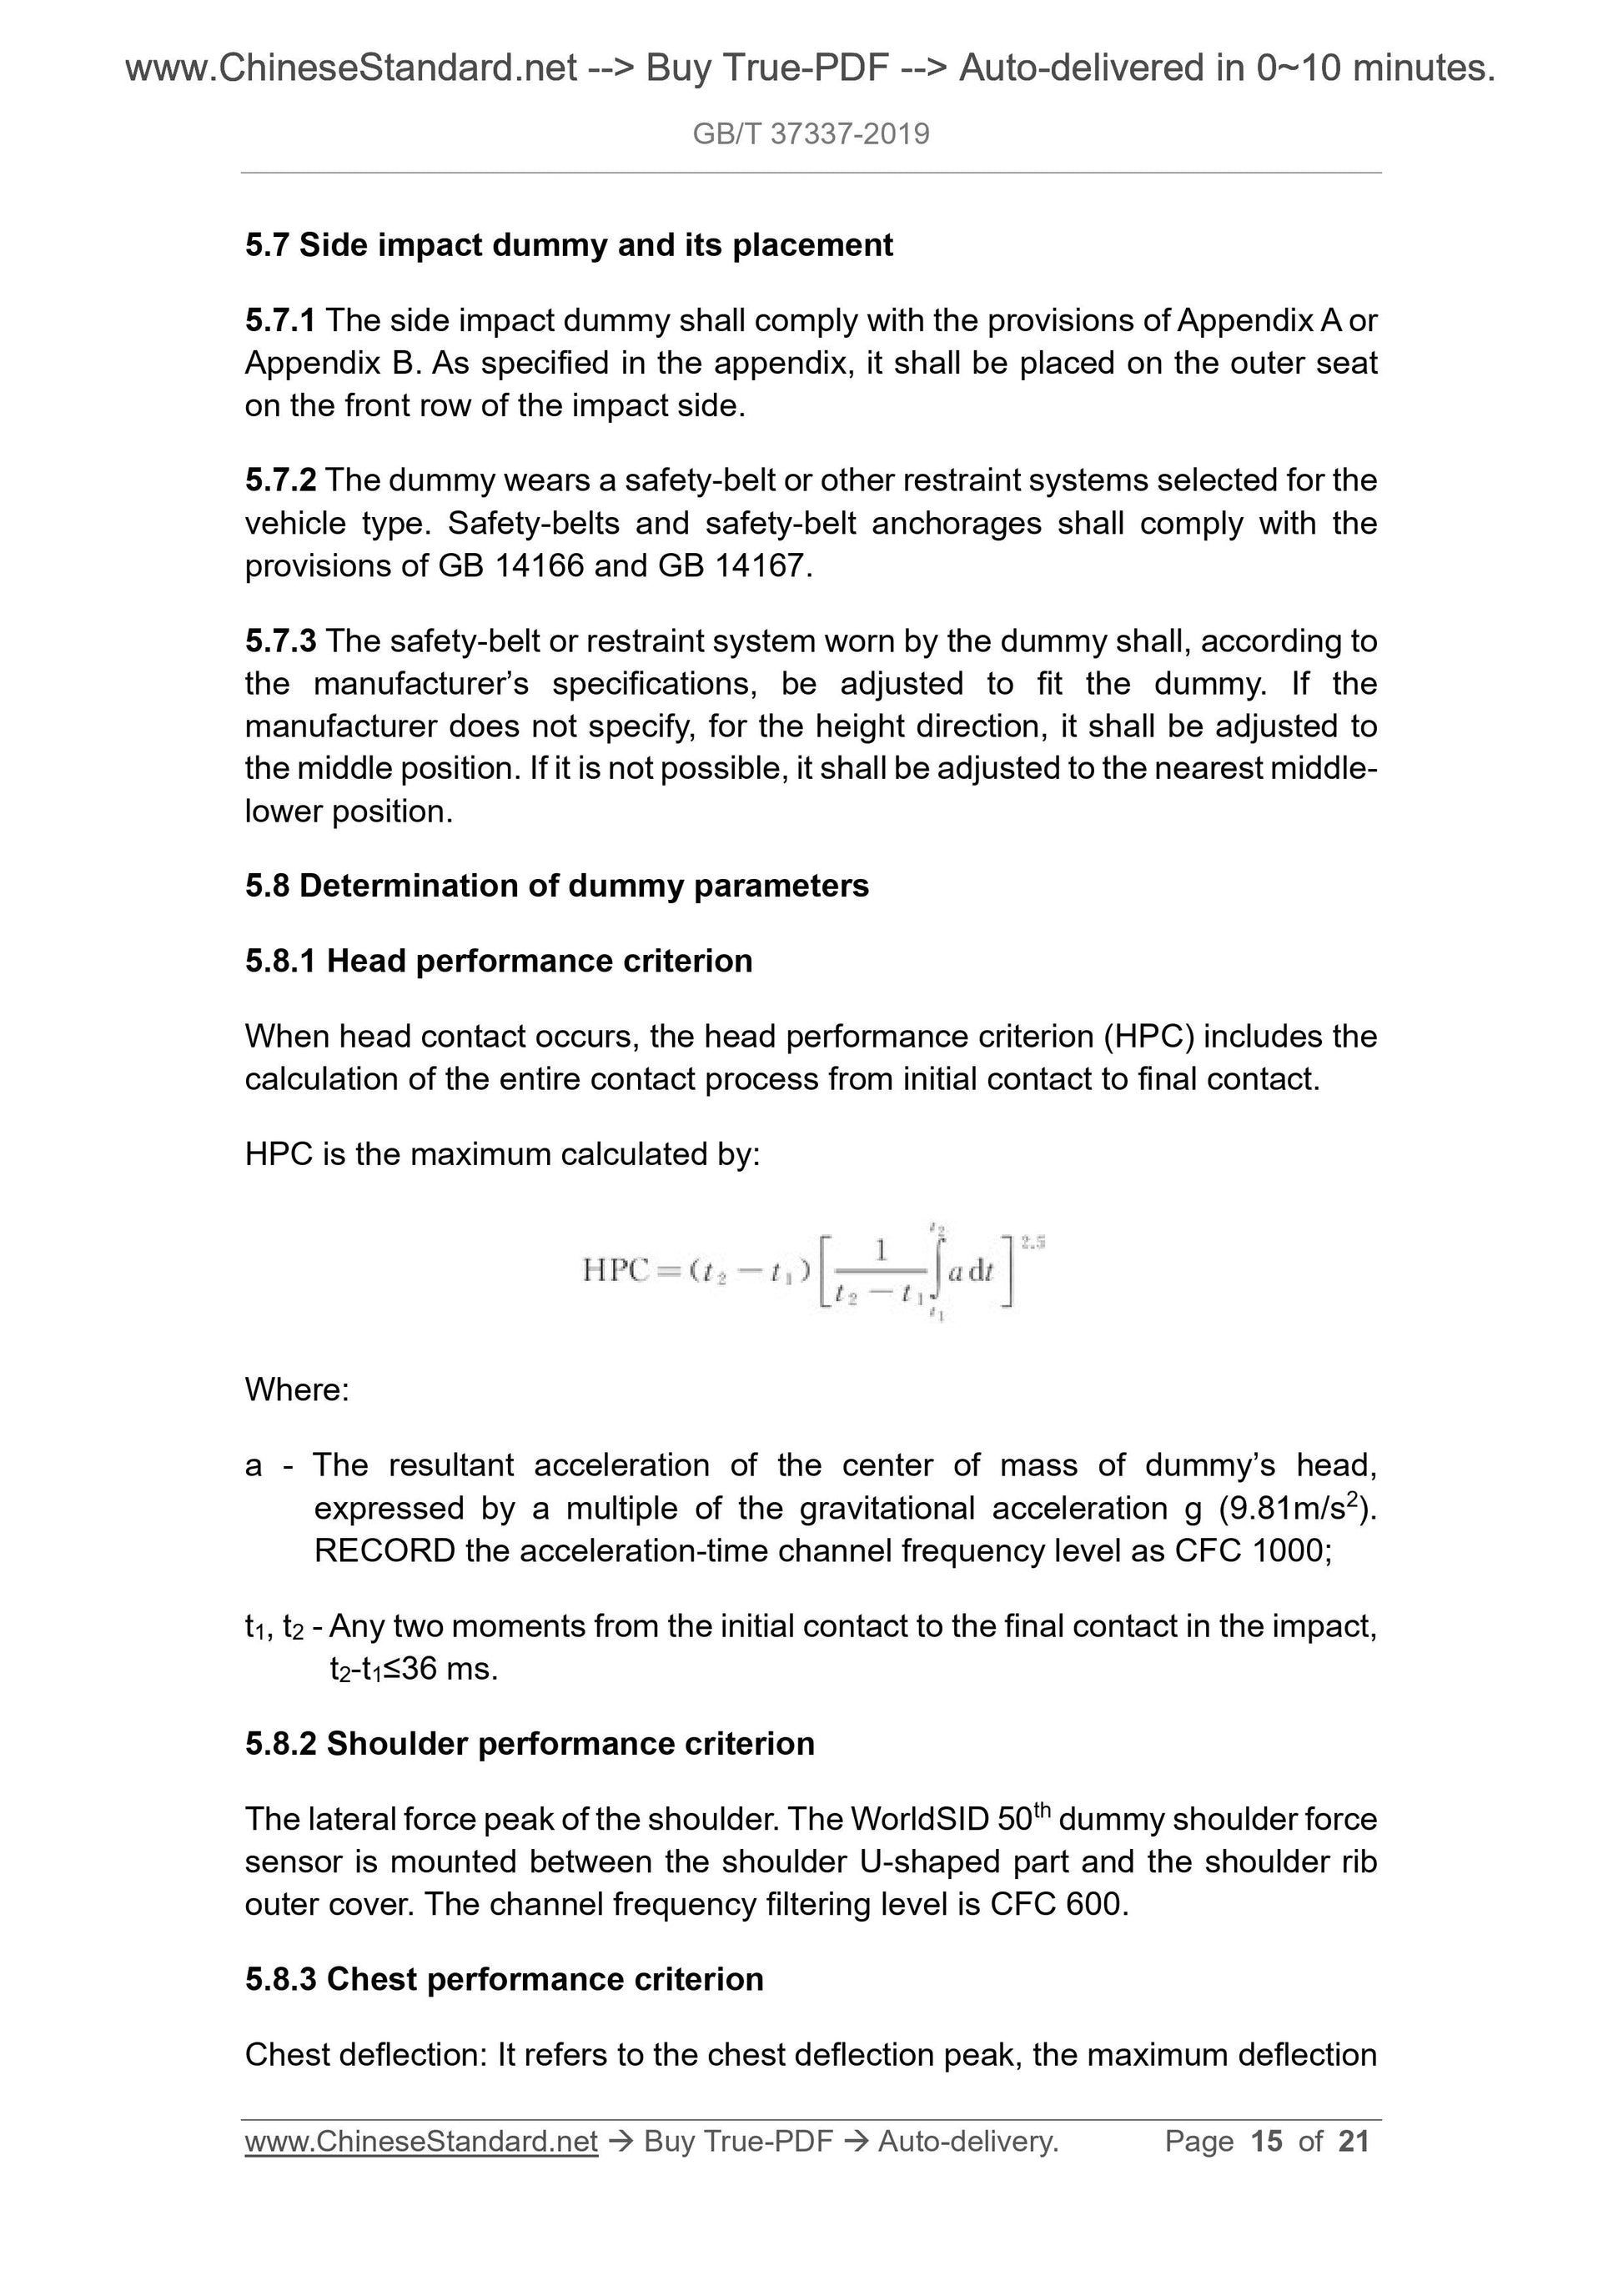 GB/T 37337-2019 Page 8